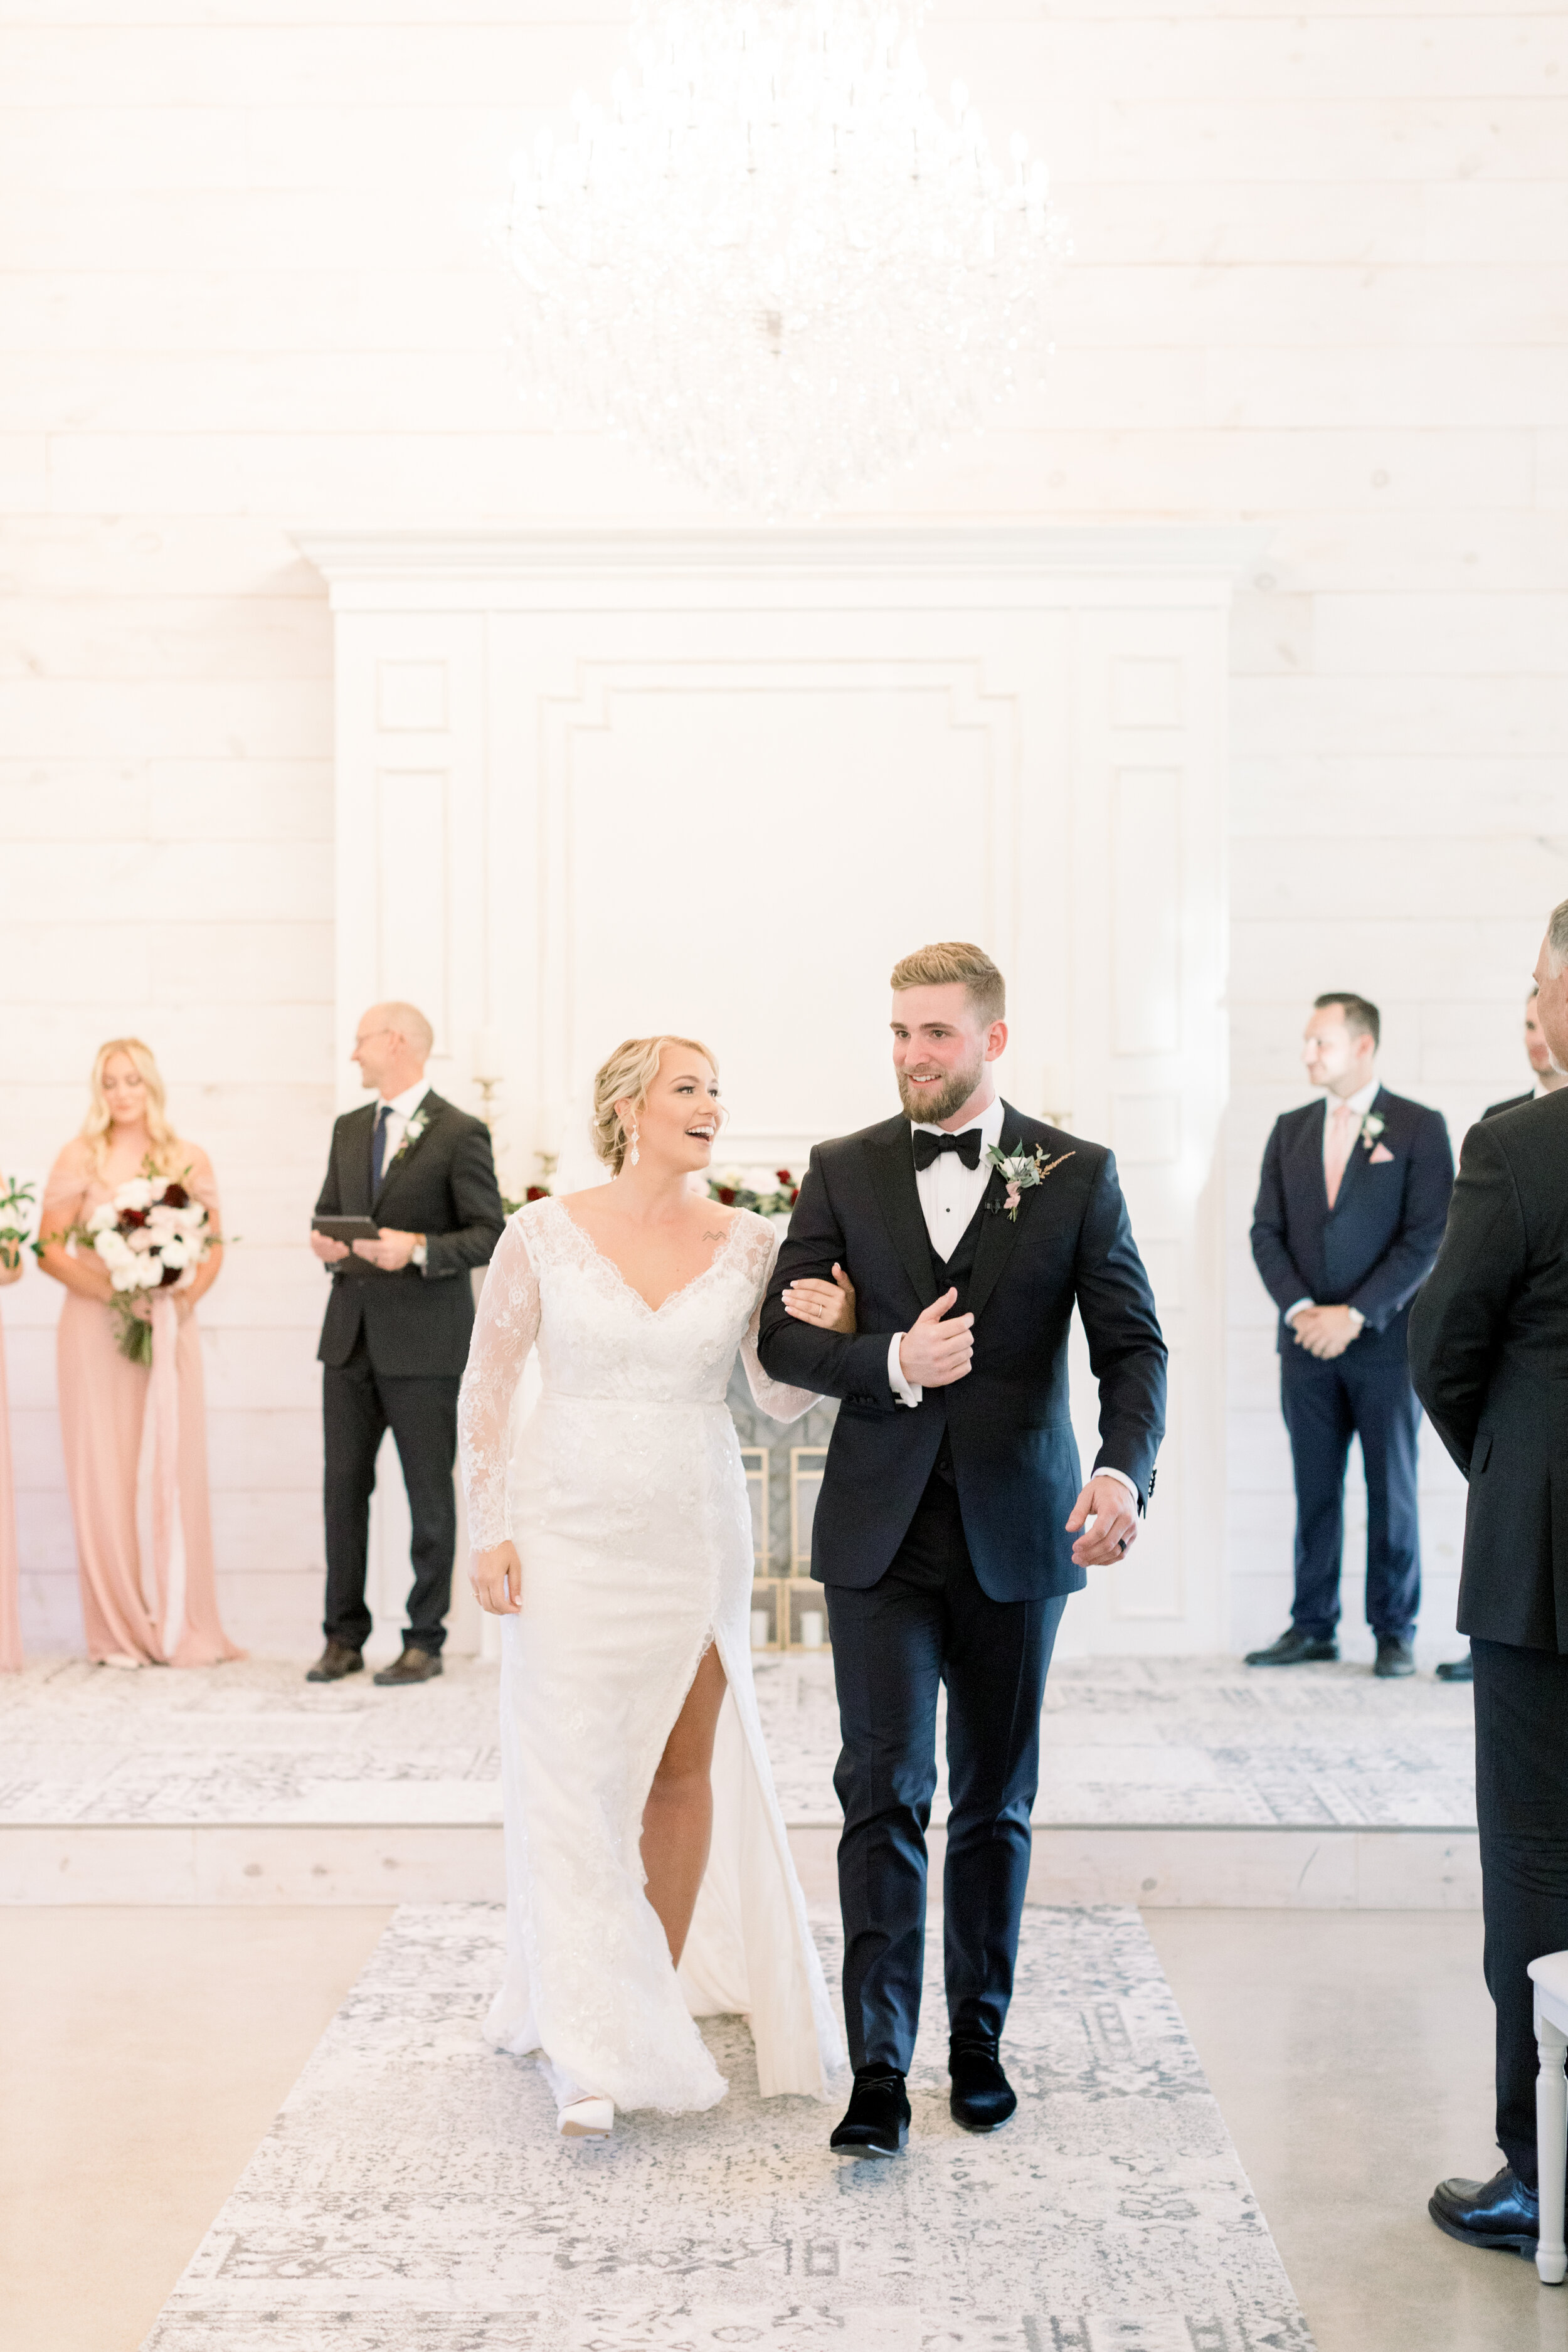  Handsome groom escourting his newly wed wife in a lace wedding dress with a high slit down the aisle after saying I do at stonefield wedding venue in Ottowa. Wedding dress with slits lace wedding dress inspo bridal shoes wedding ceremony grand exit 